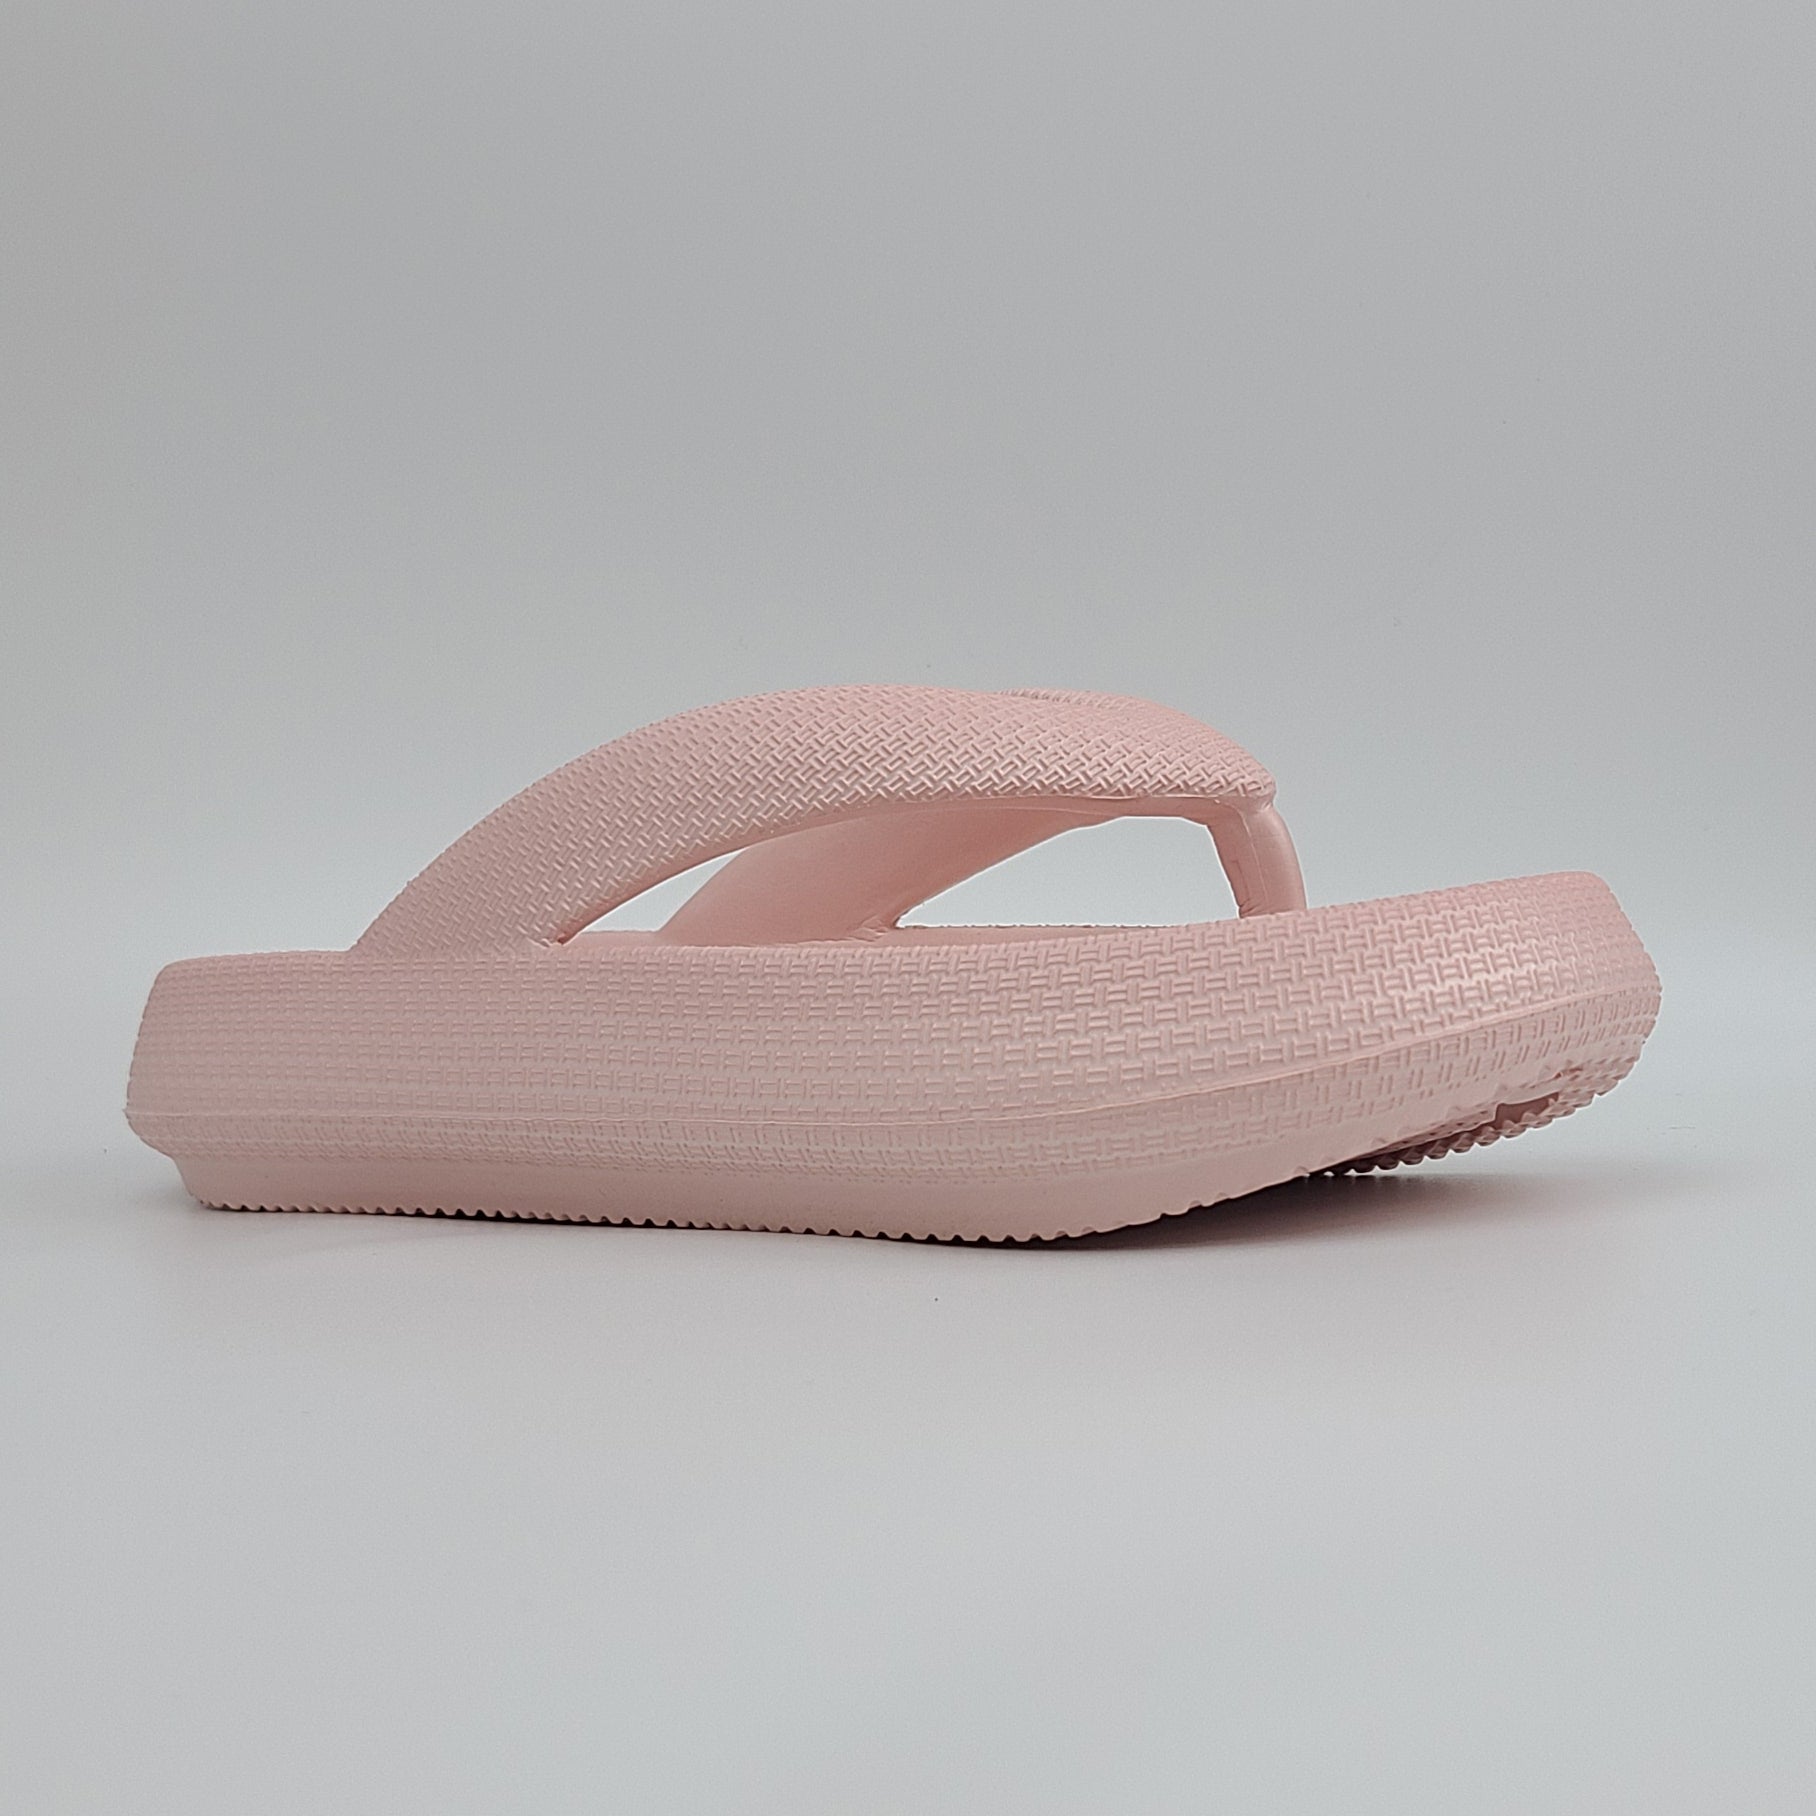 Comfort is cute 🤩 Arch Support Slides all day everyday ☀️ #archiesfoo, Walking Shoes